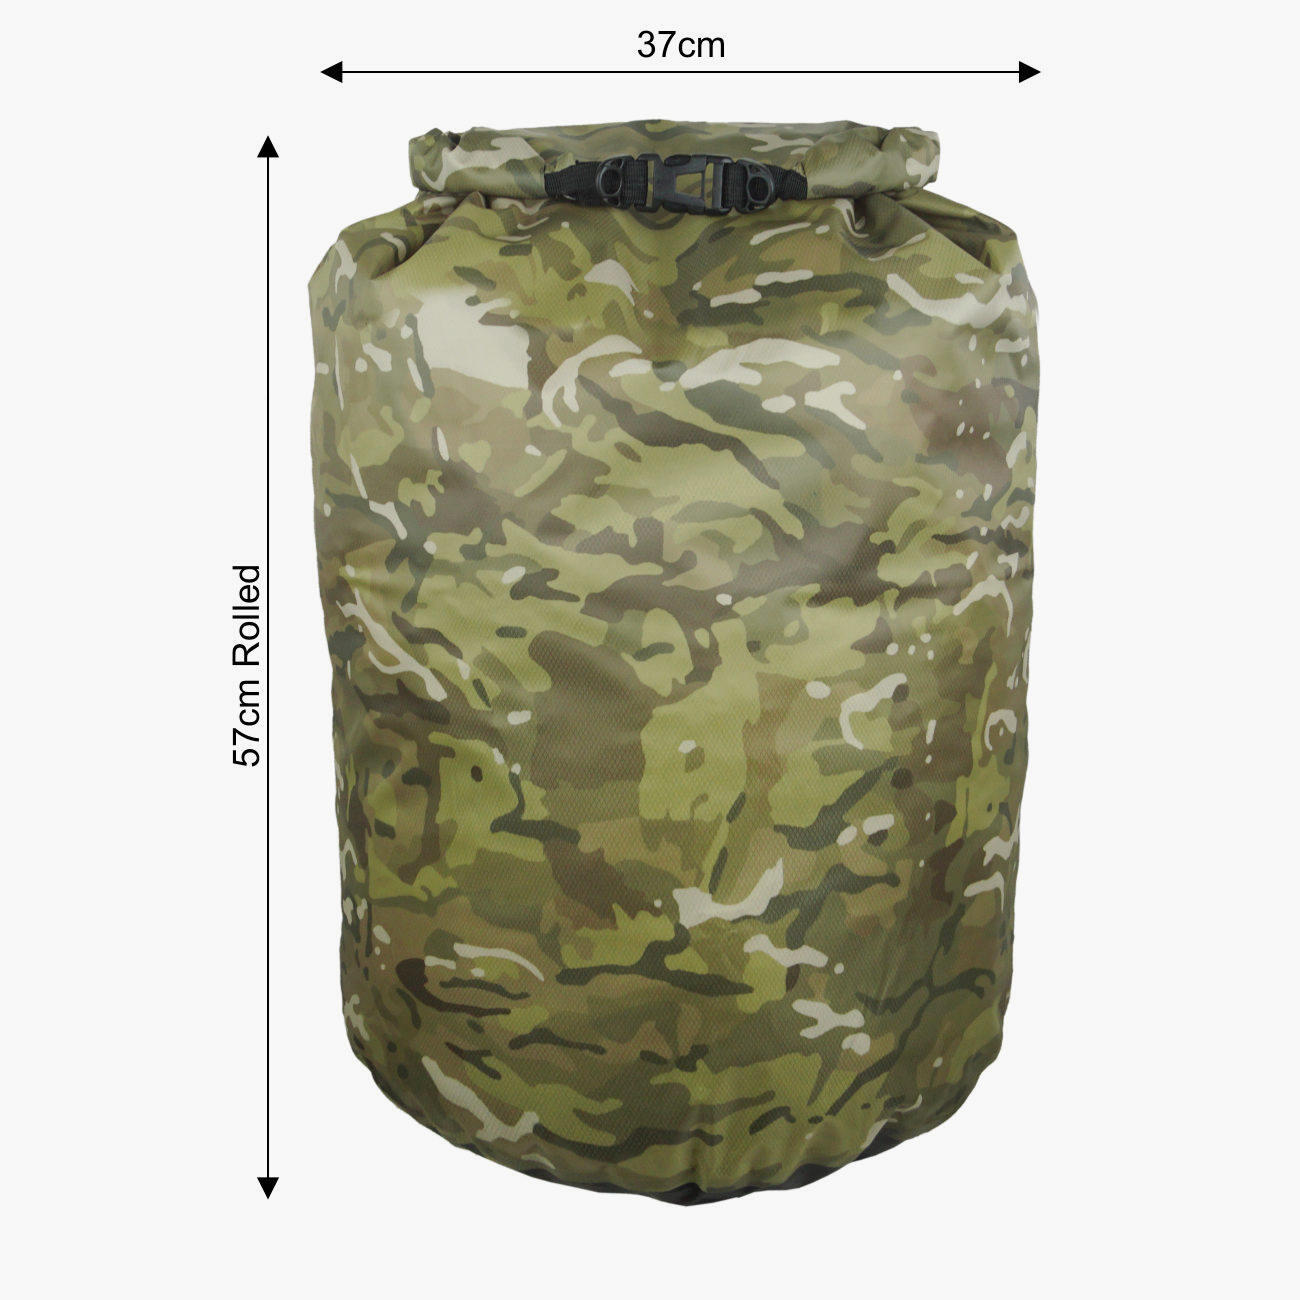 Lomo 60L Camouflage Dry Bag - Roll Down 4/4